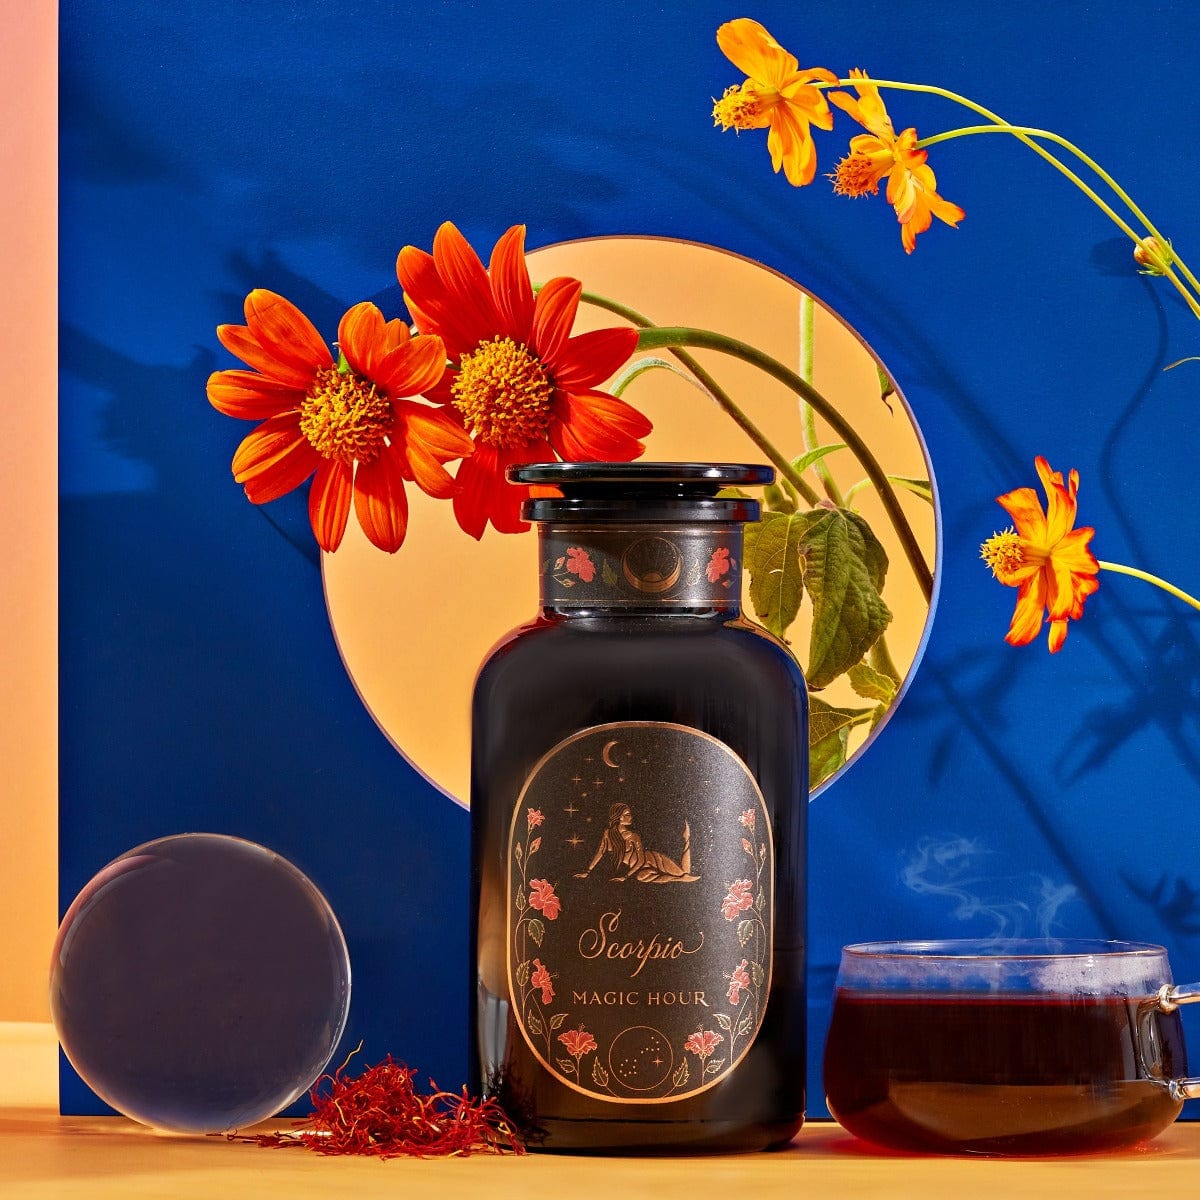 A dark jar labeled "Scorpio Tea for Sensual Brilliance" is placed on a table next to a teacup filled with Magic Hour Tea, saffron threads, and a clear orb. The background features bright orange flowers and a vibrant blue backdrop with a circular opening revealing more flowers.